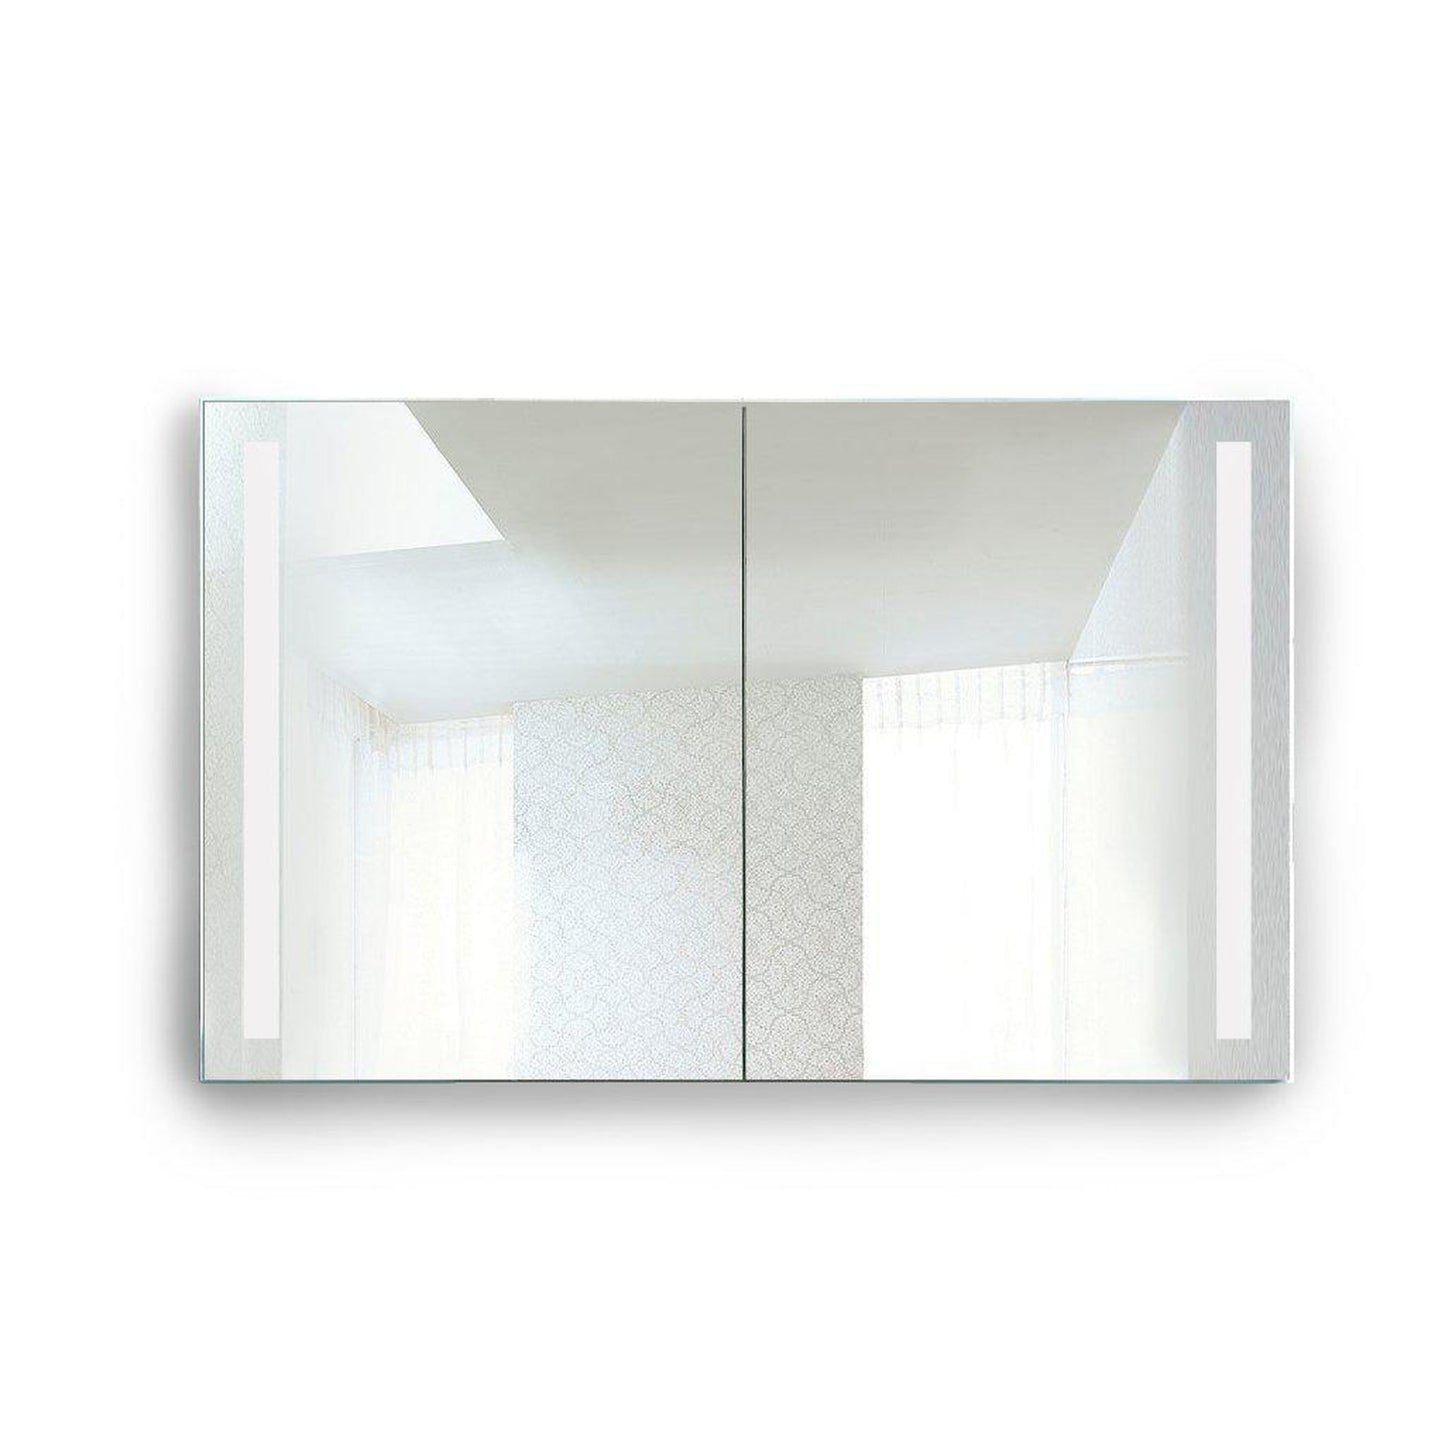 Krugg Reflections Rolls 48" x 30" Double Dual Opening Rectangular Recessed/Surface-Mount Illuminated Silver Backed LED Medicine Cabinet Mirror With Built-in Defogger, Dimmer and Electrical Outlet